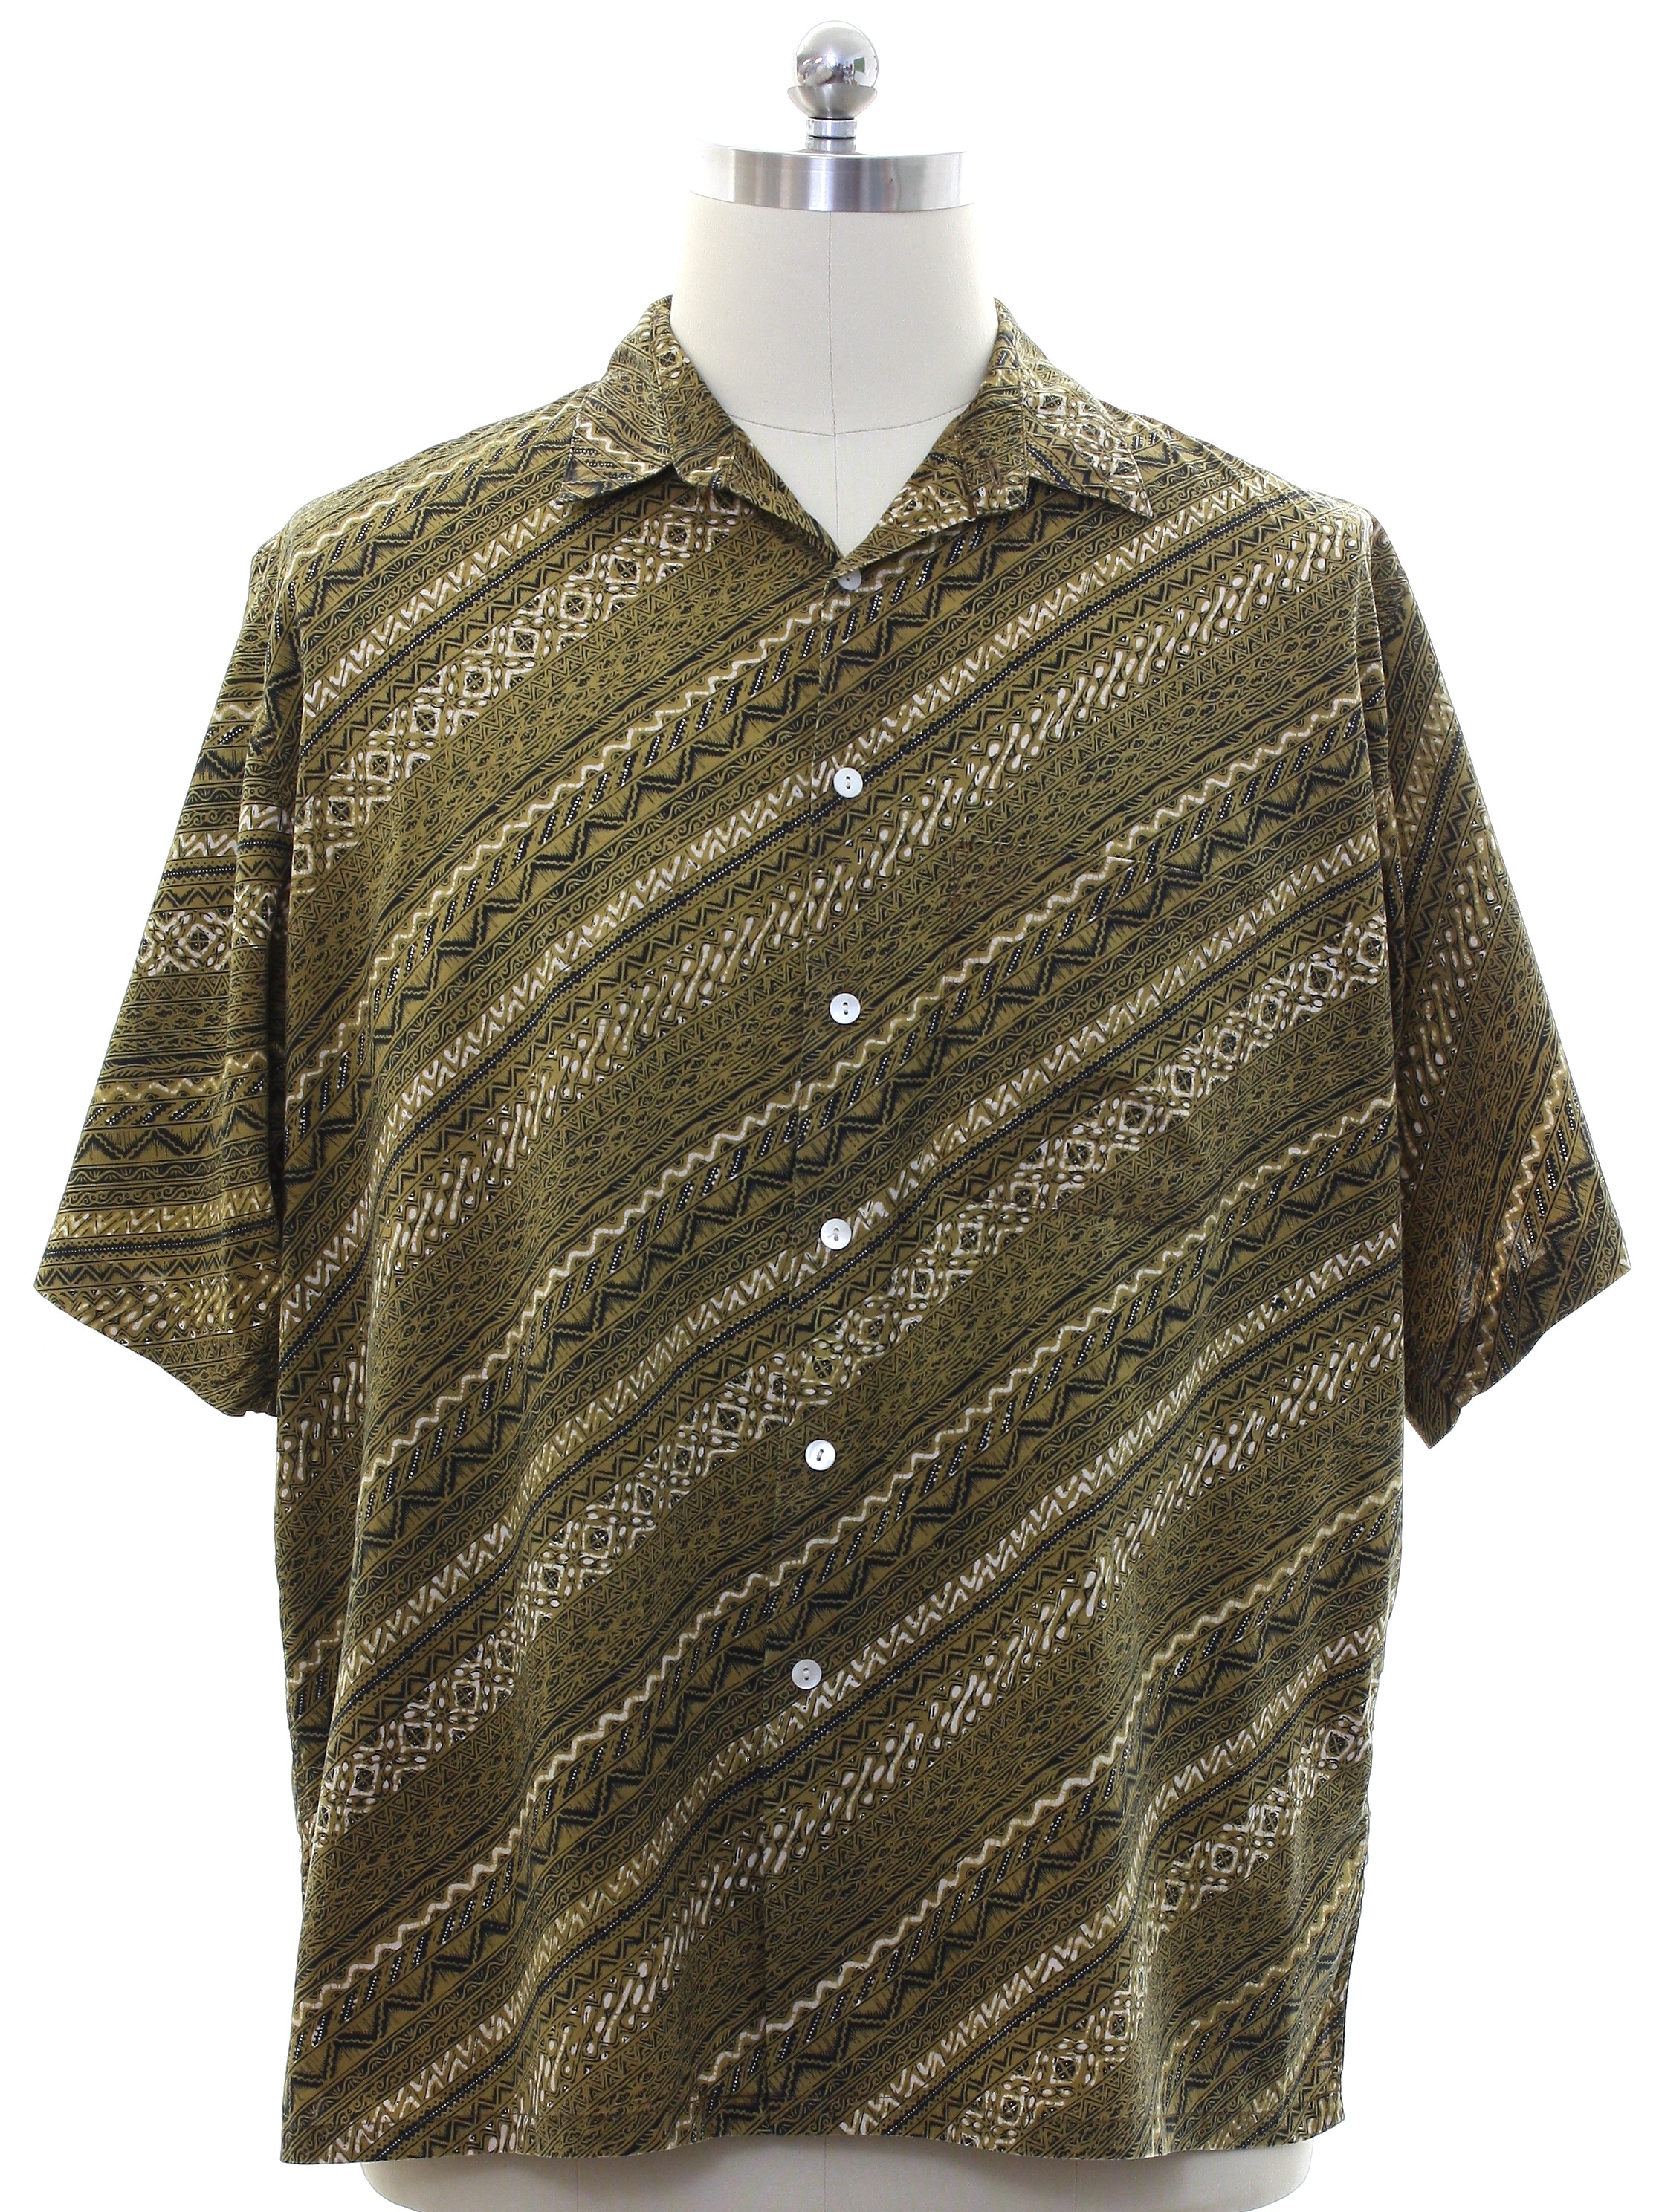 1990's Retro Shirt: 90s or newer -The J Peterman Co.- Mens harvest gold ...